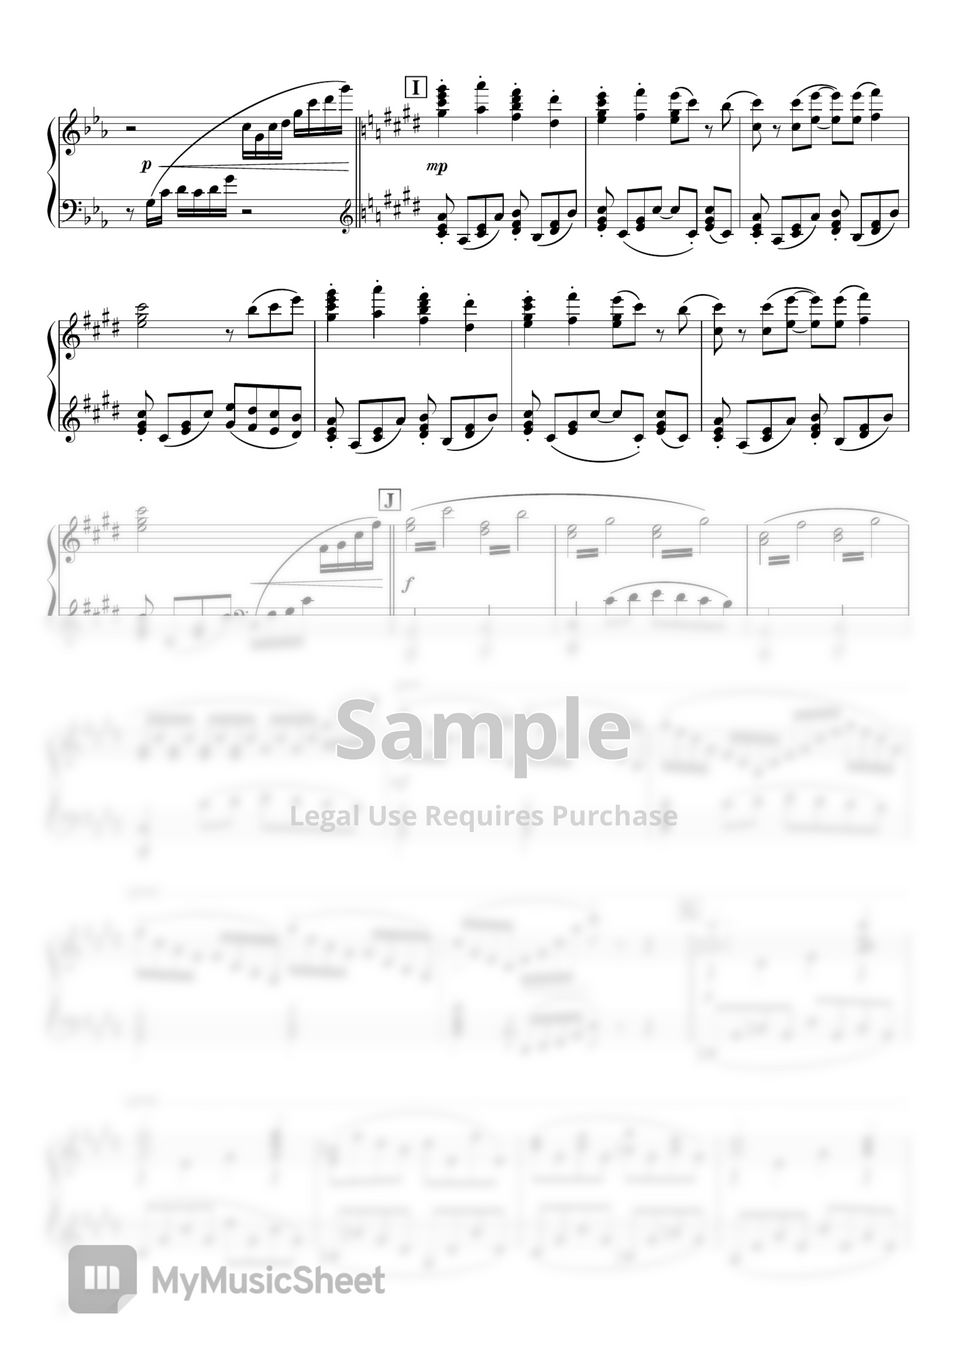 Soul Eater - Resonance (incomplete) Sheet Music by for Various